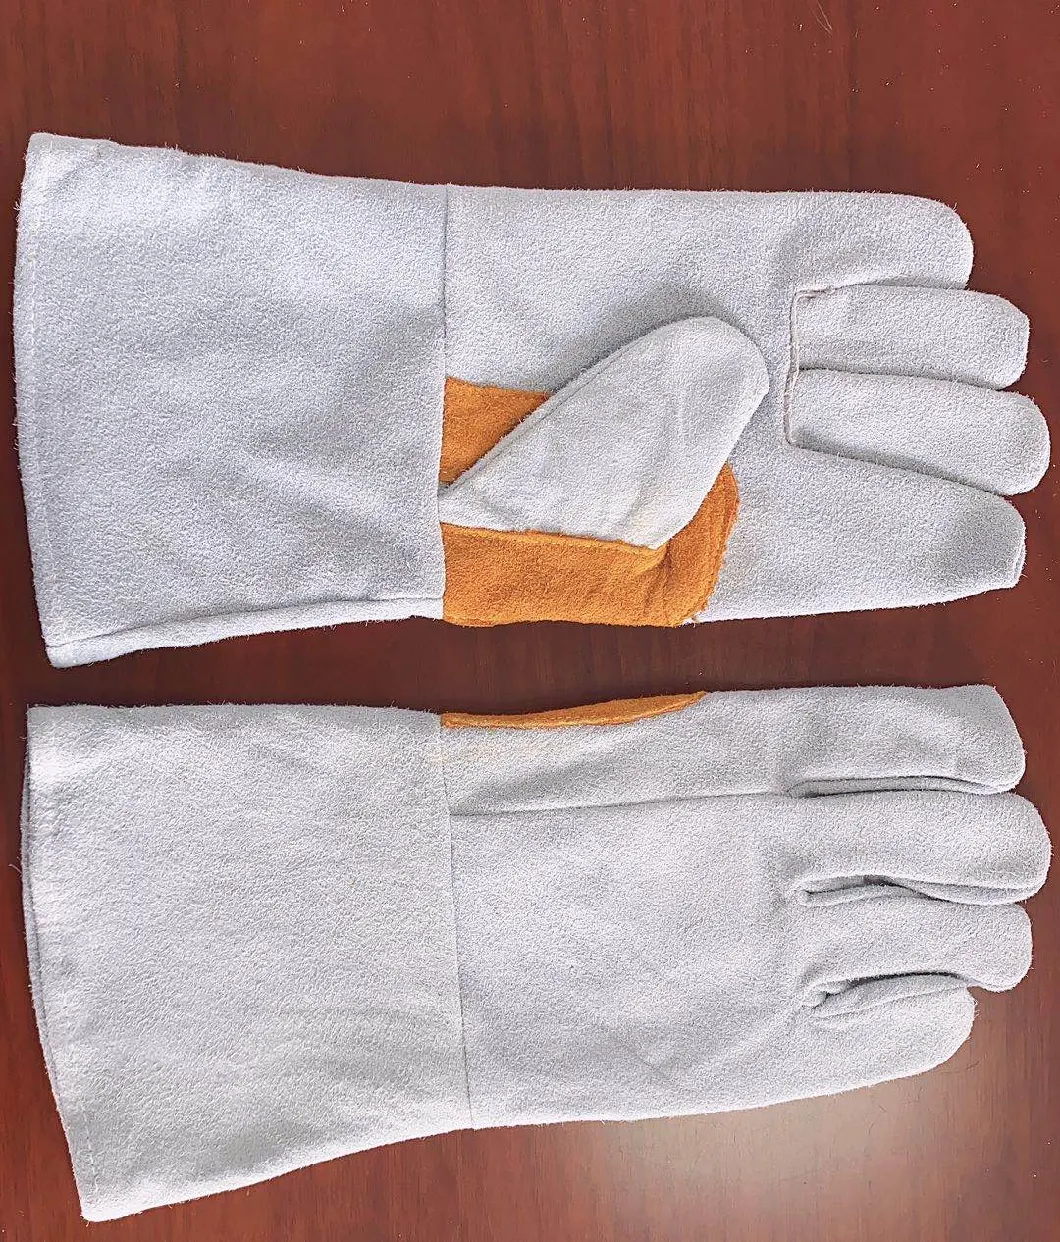 Red Cowhide Split Leather Industrial Hand Safety Welding Work Gloves